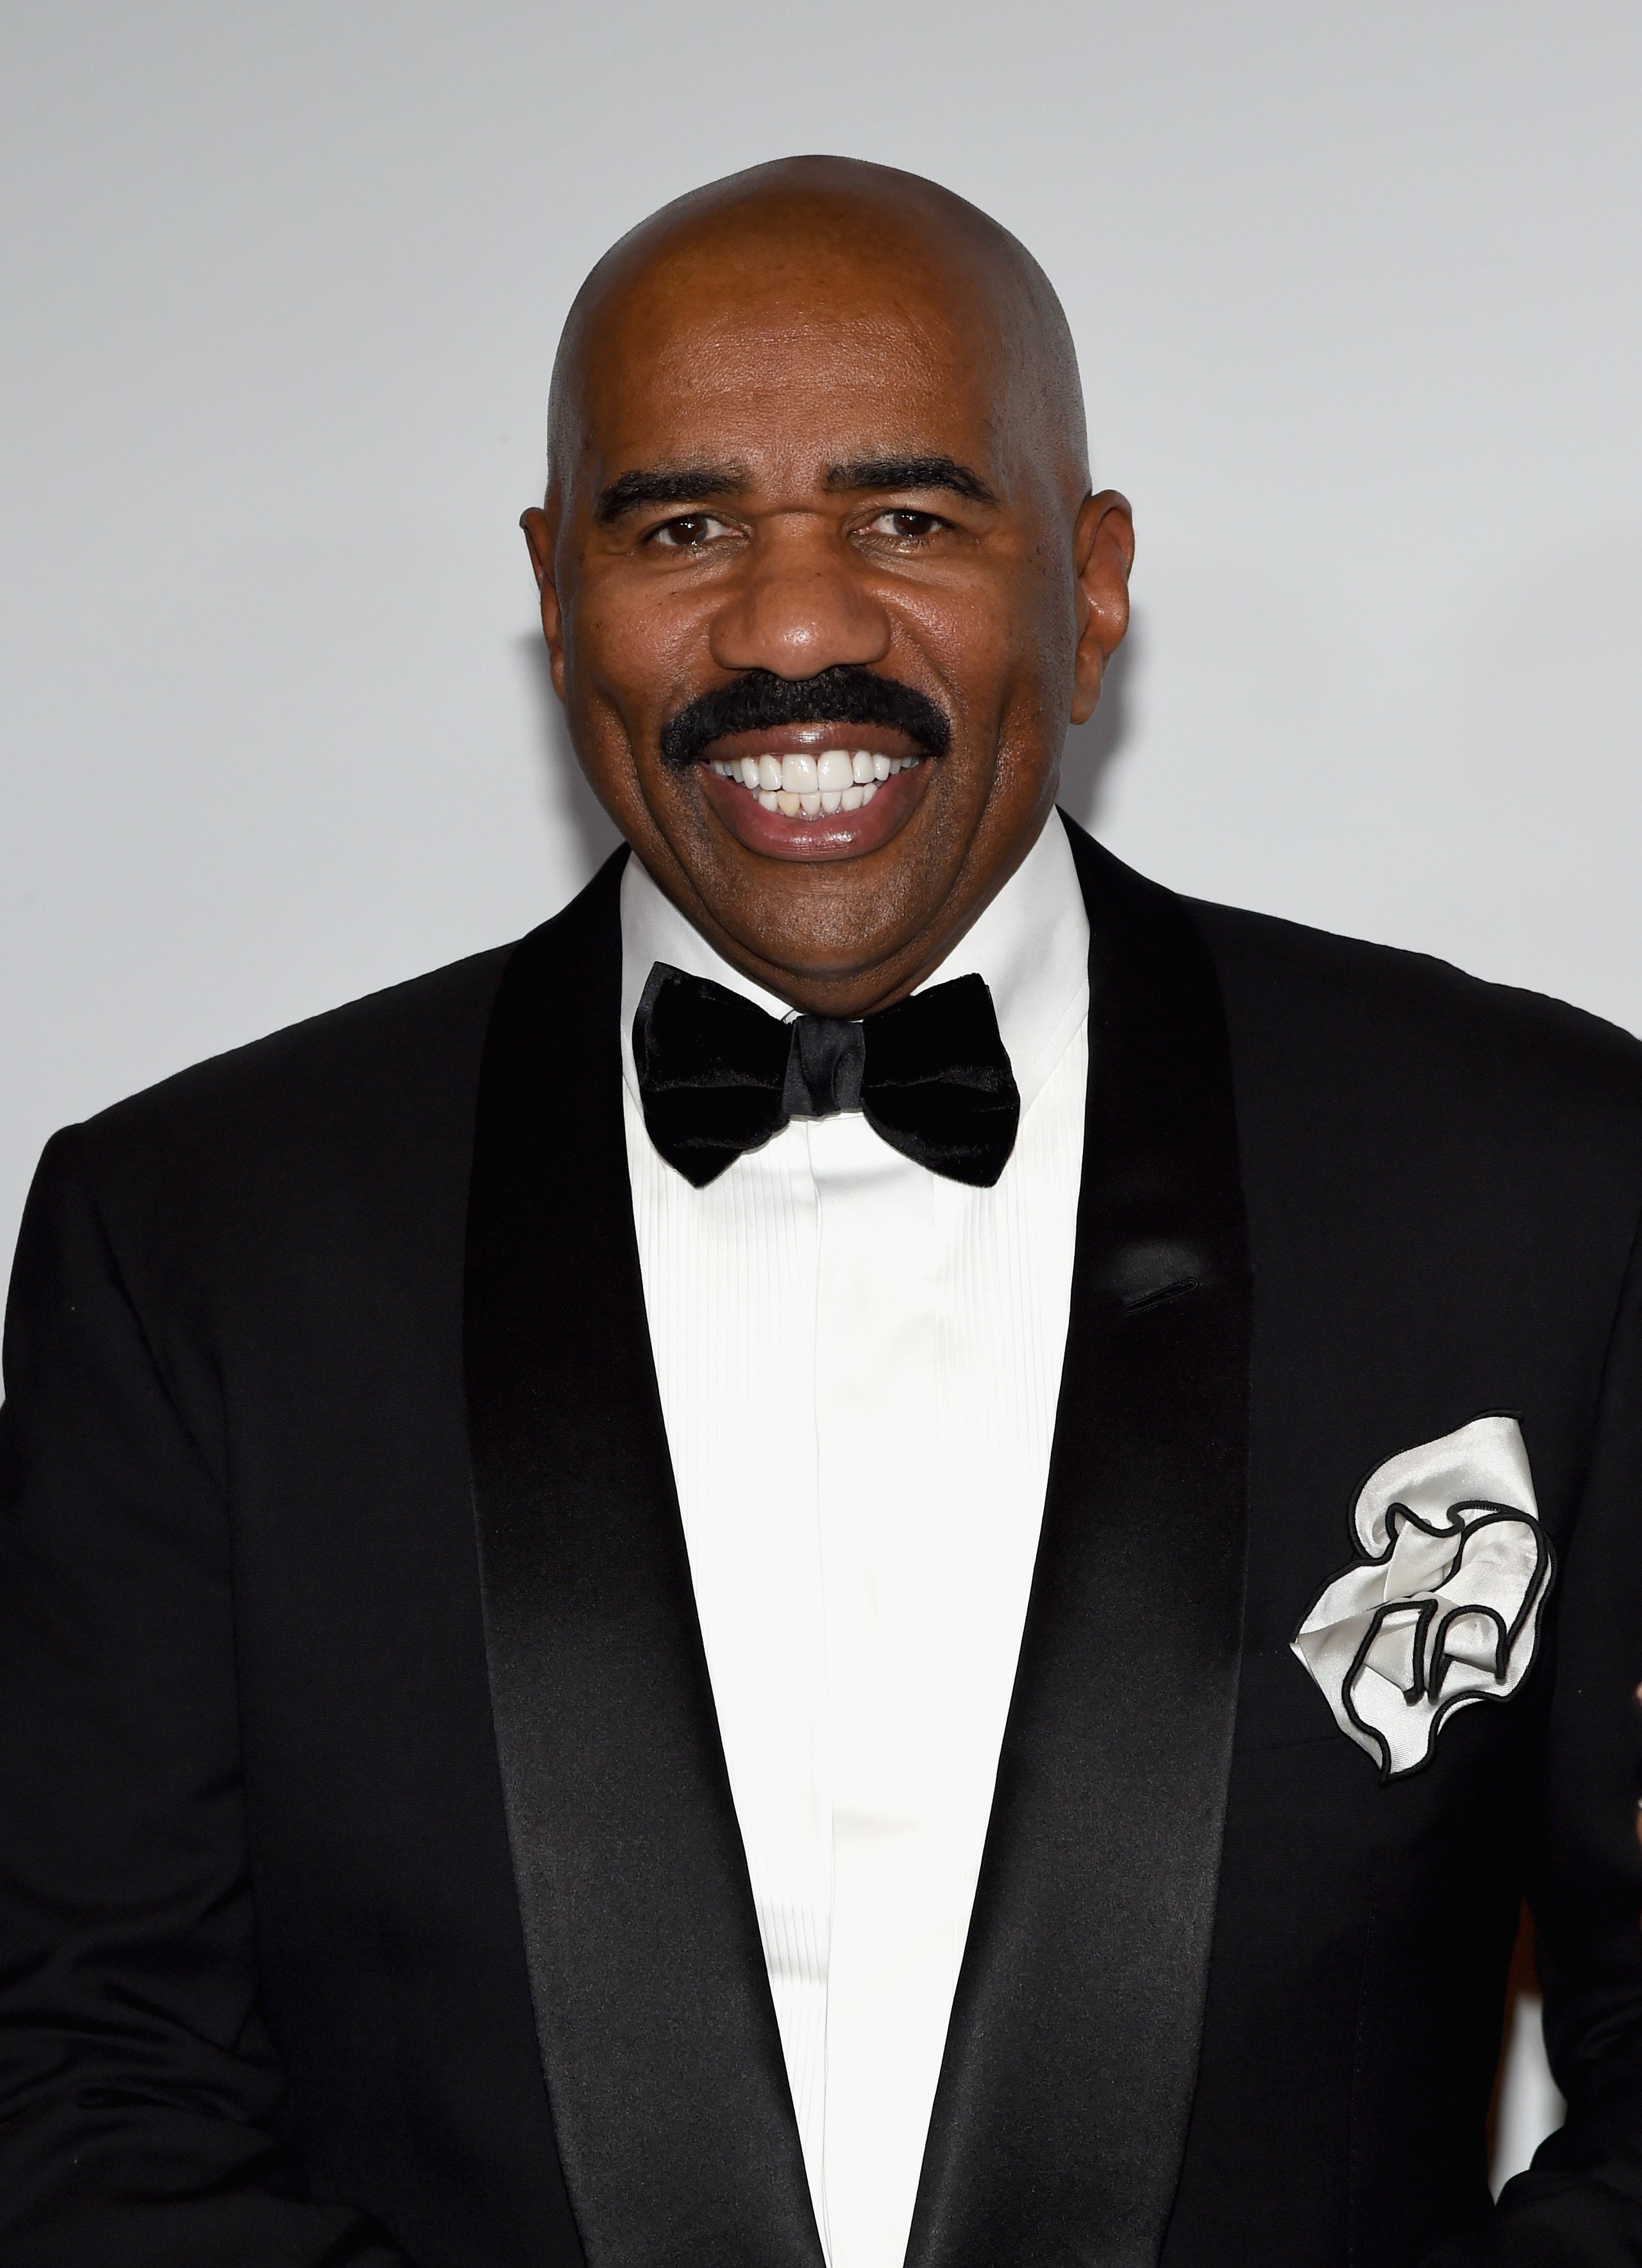 Steve Harvey at the 2015 Miss Universe Pageant at Planet Hollywood Resort & Casino in Las Vegas on December 20, 2015. | Photo: Getty Images